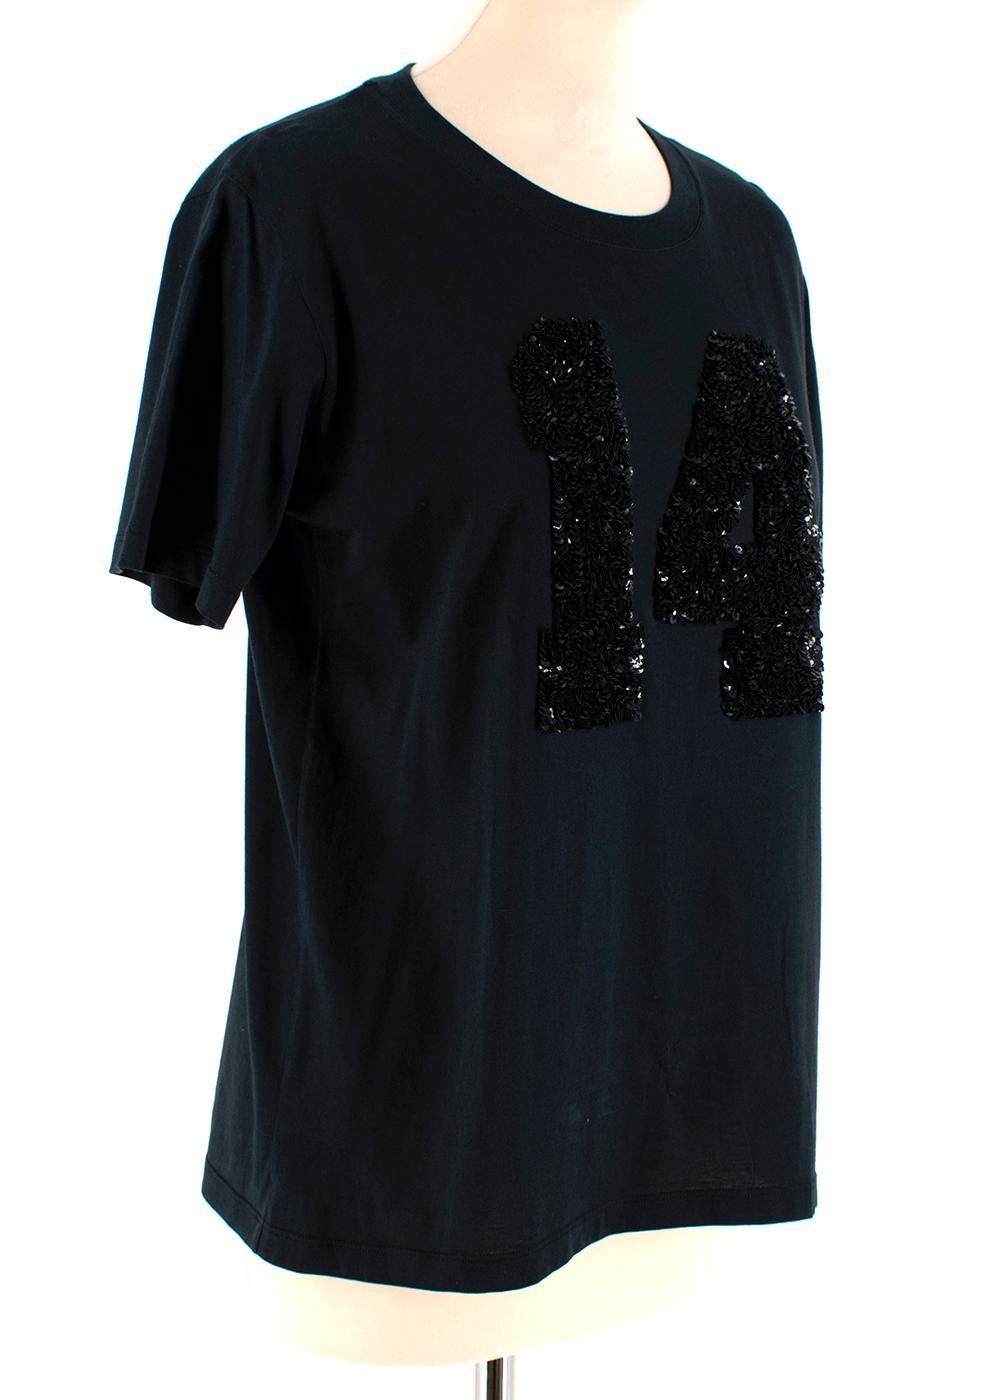 Louis Vuitton Black Cotton 'Paris' 14 Sequin Embellished T-shirt

- Sequin Embellishment to front and back 
- Rounded Neckline 
- Straight Hemline
- Short-Sleeved

Materials 
100% Cotton 

Dry Clean Only 

Made in Italy 
Measurements are taken